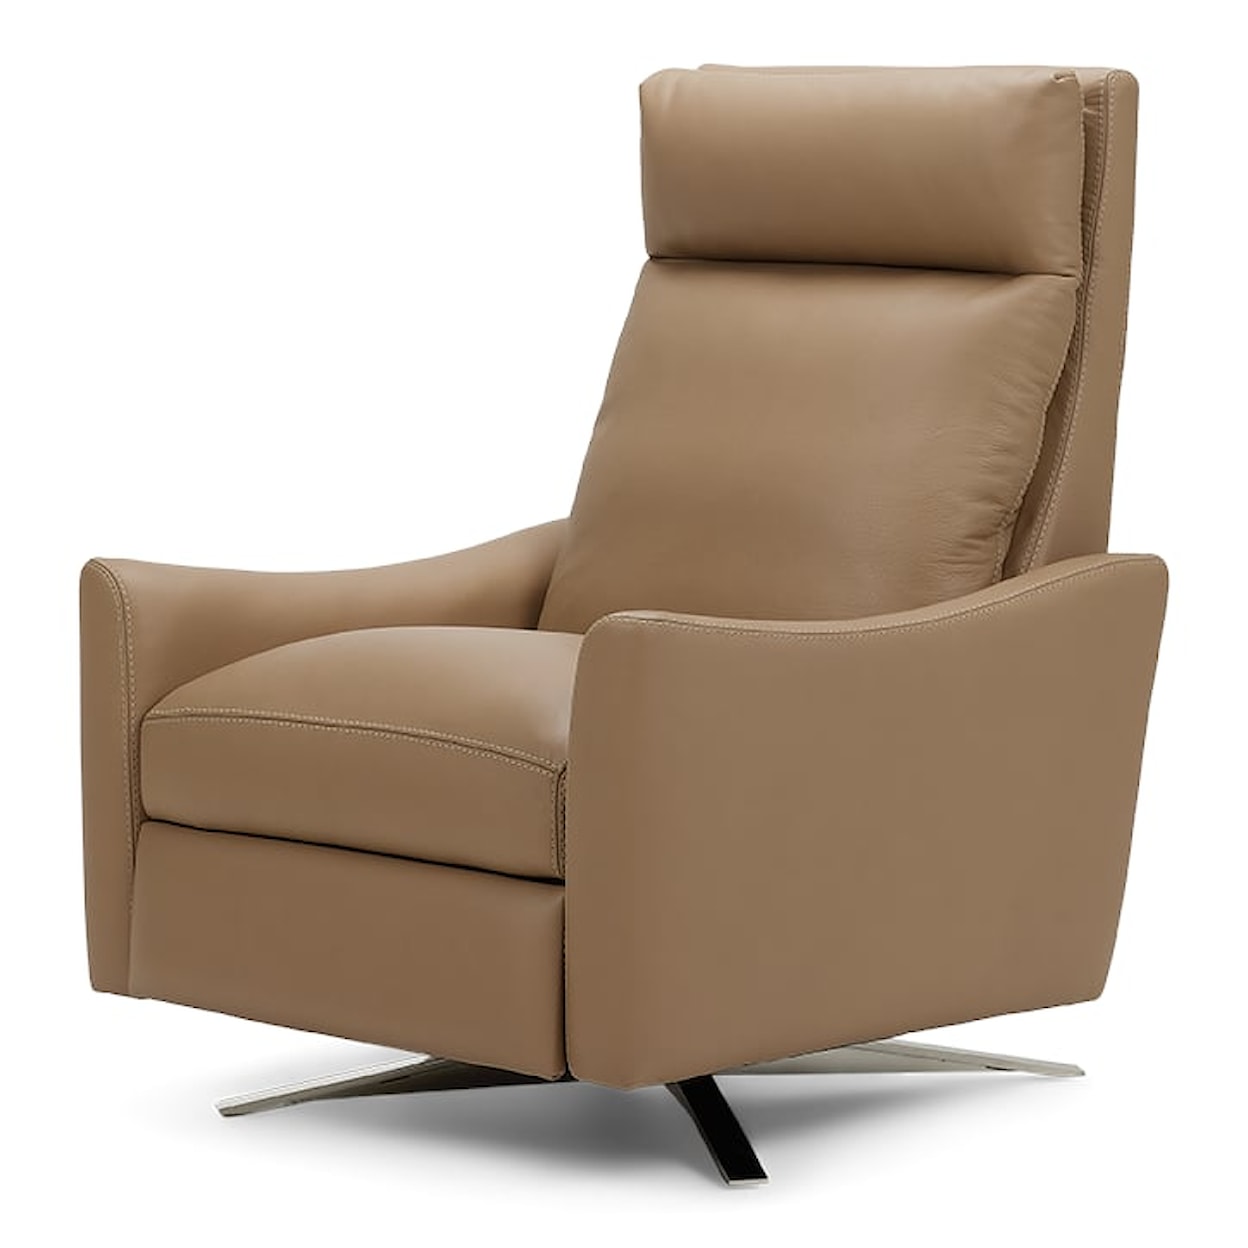 American Leather Ontario Ontario Comfort Air Chair